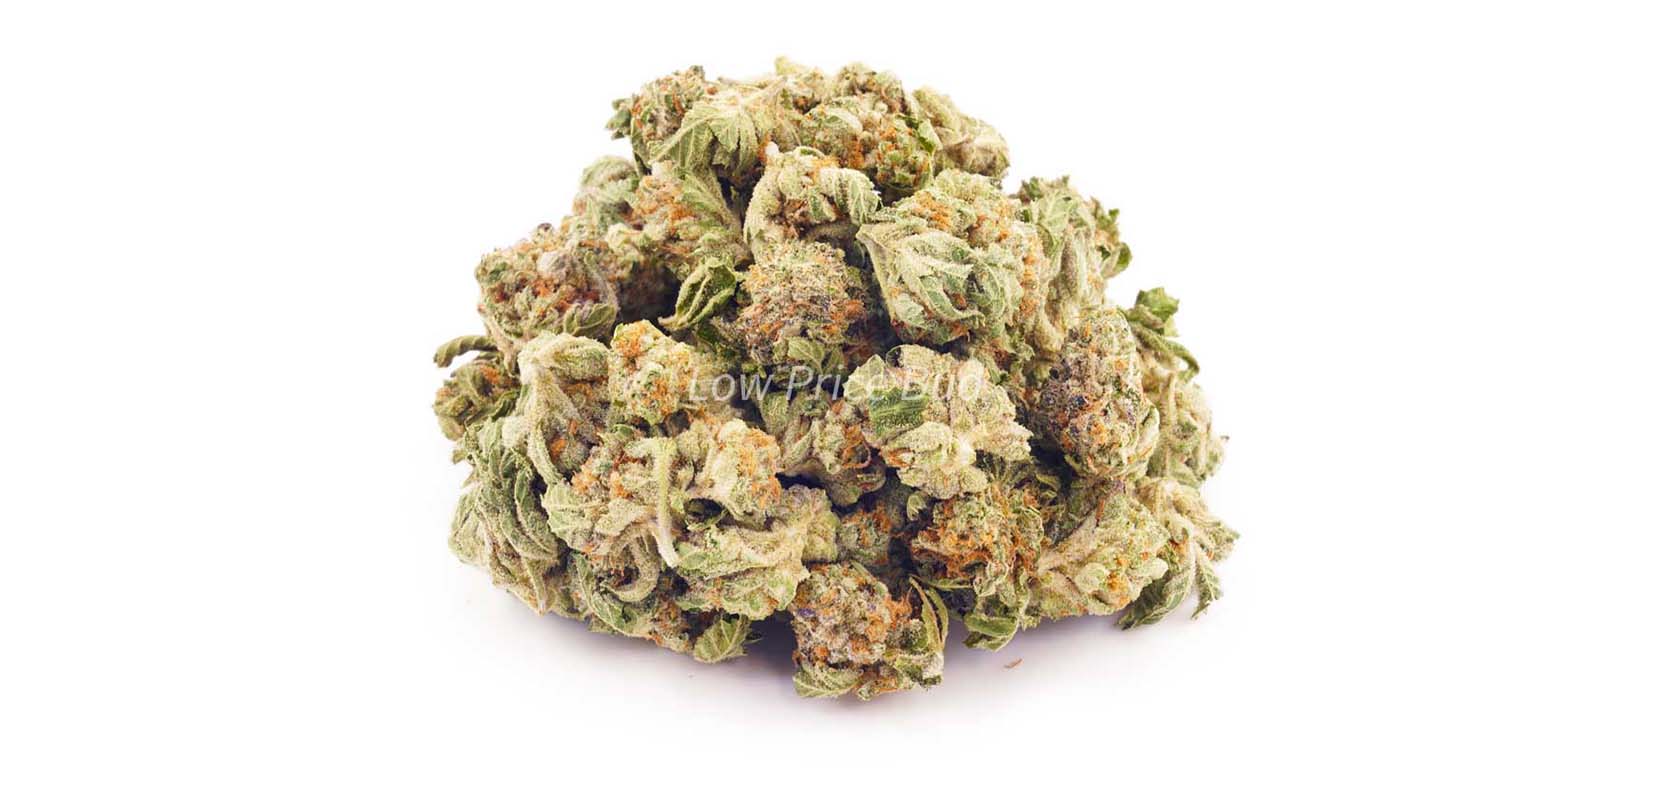 Blackberry strain budget buds from Low Price Bud online weed dispensary for weed online Canada, budget buds, gummys, and dispensary weed.